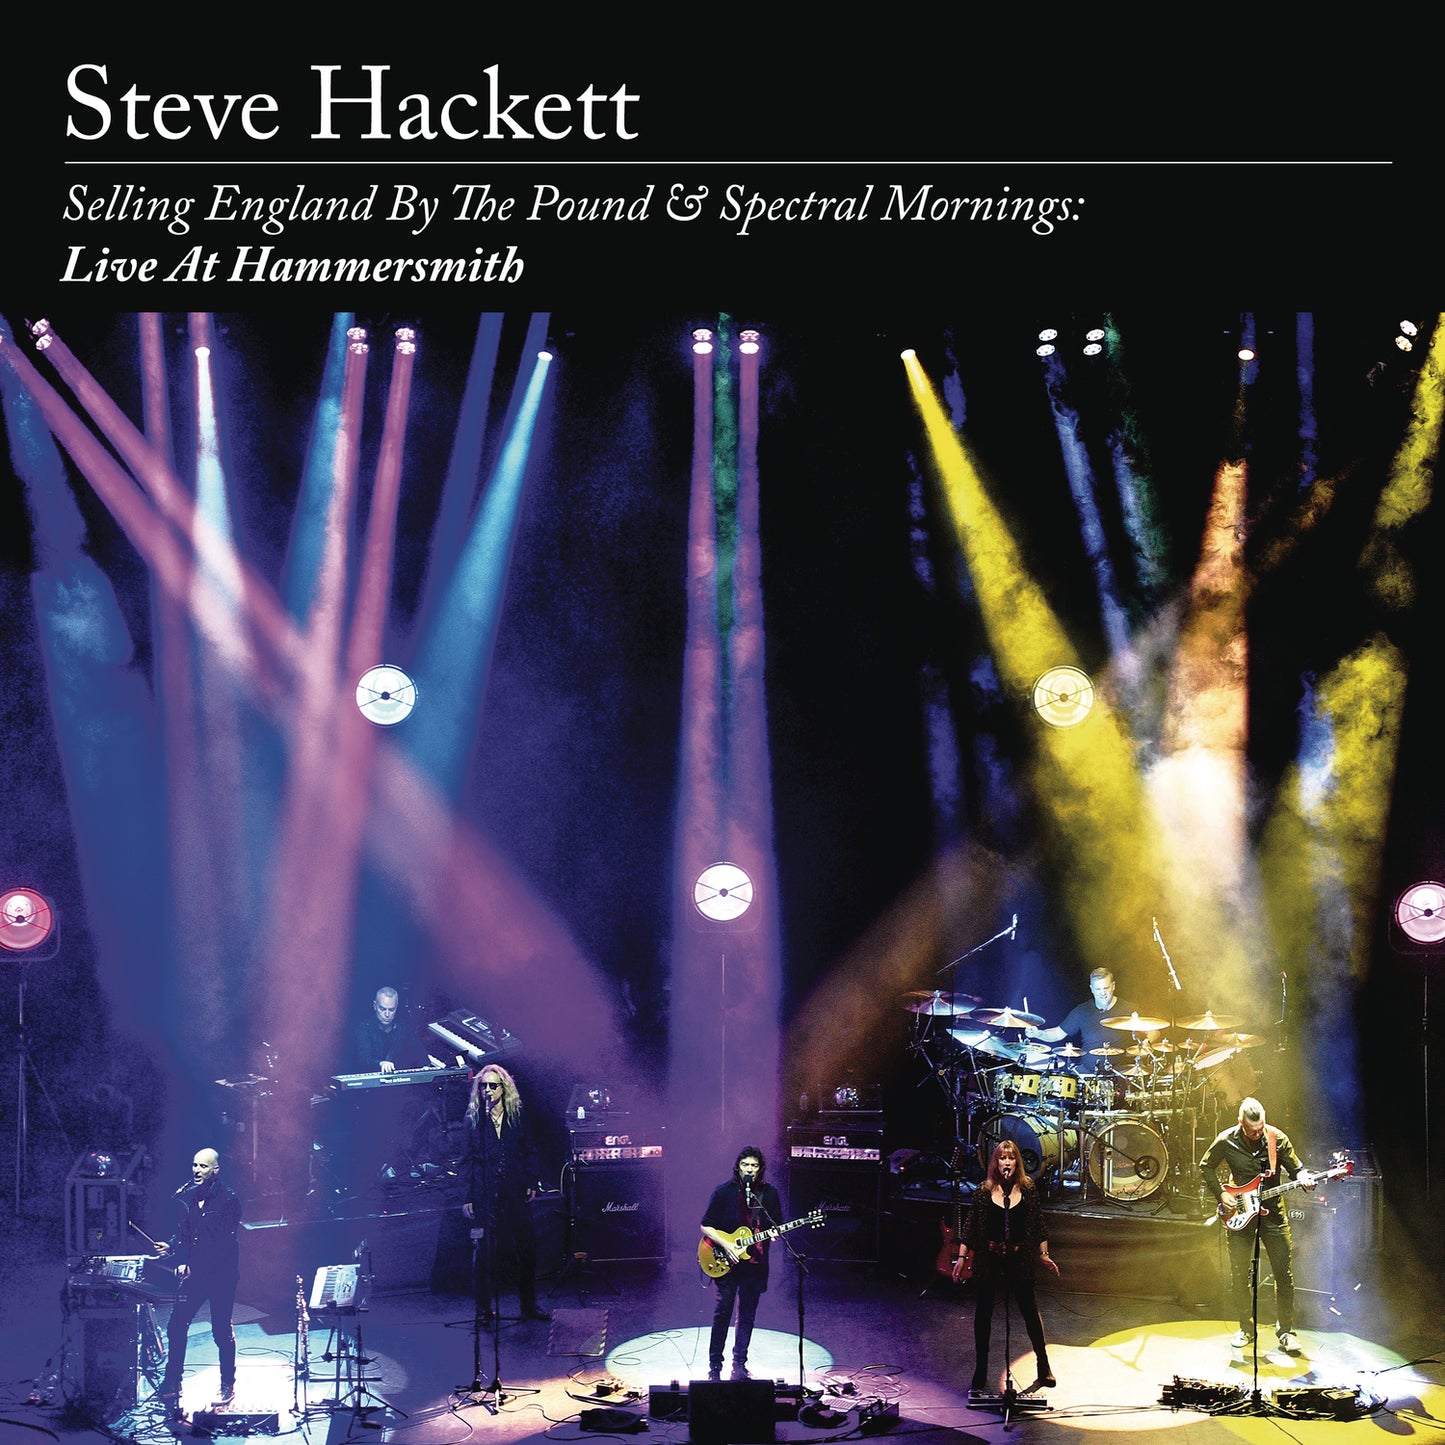 Steve Hackett - Selling England By The Pound: Live At Hammersmith - 2 CD/DVD